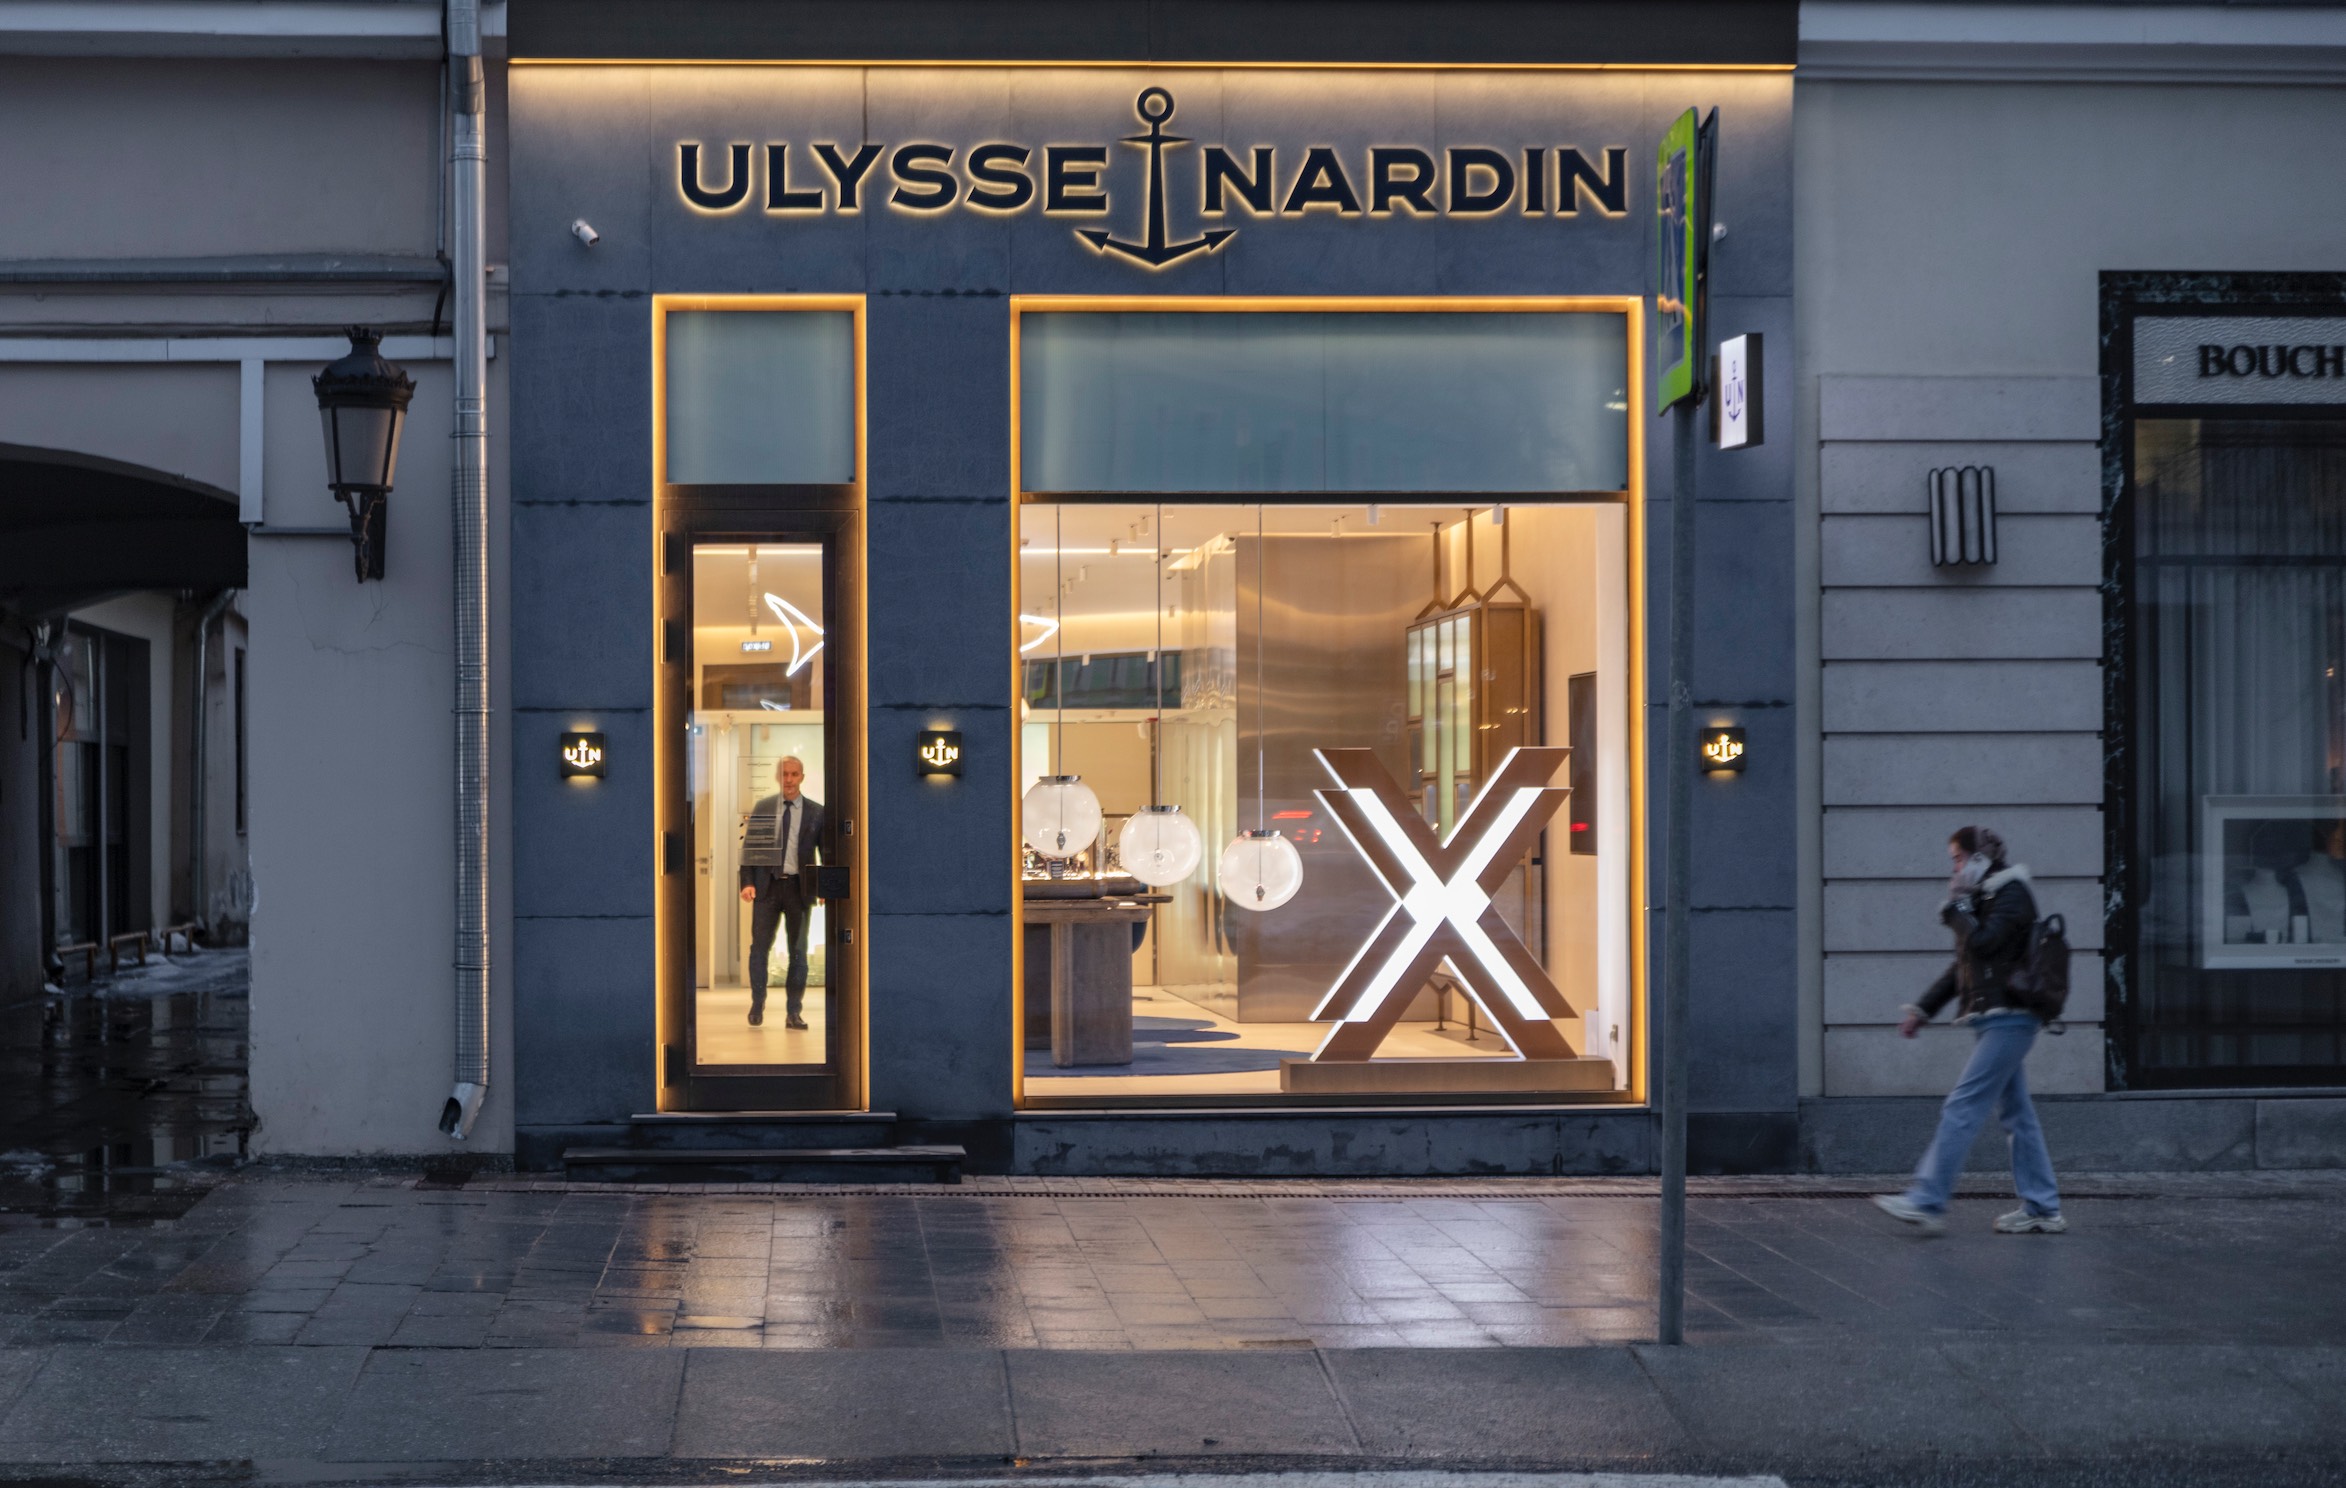 Ulysse Nardin's boutique on Petrovka street in Moscow. It’s the only Western brand where the lights are on for many blocks around.